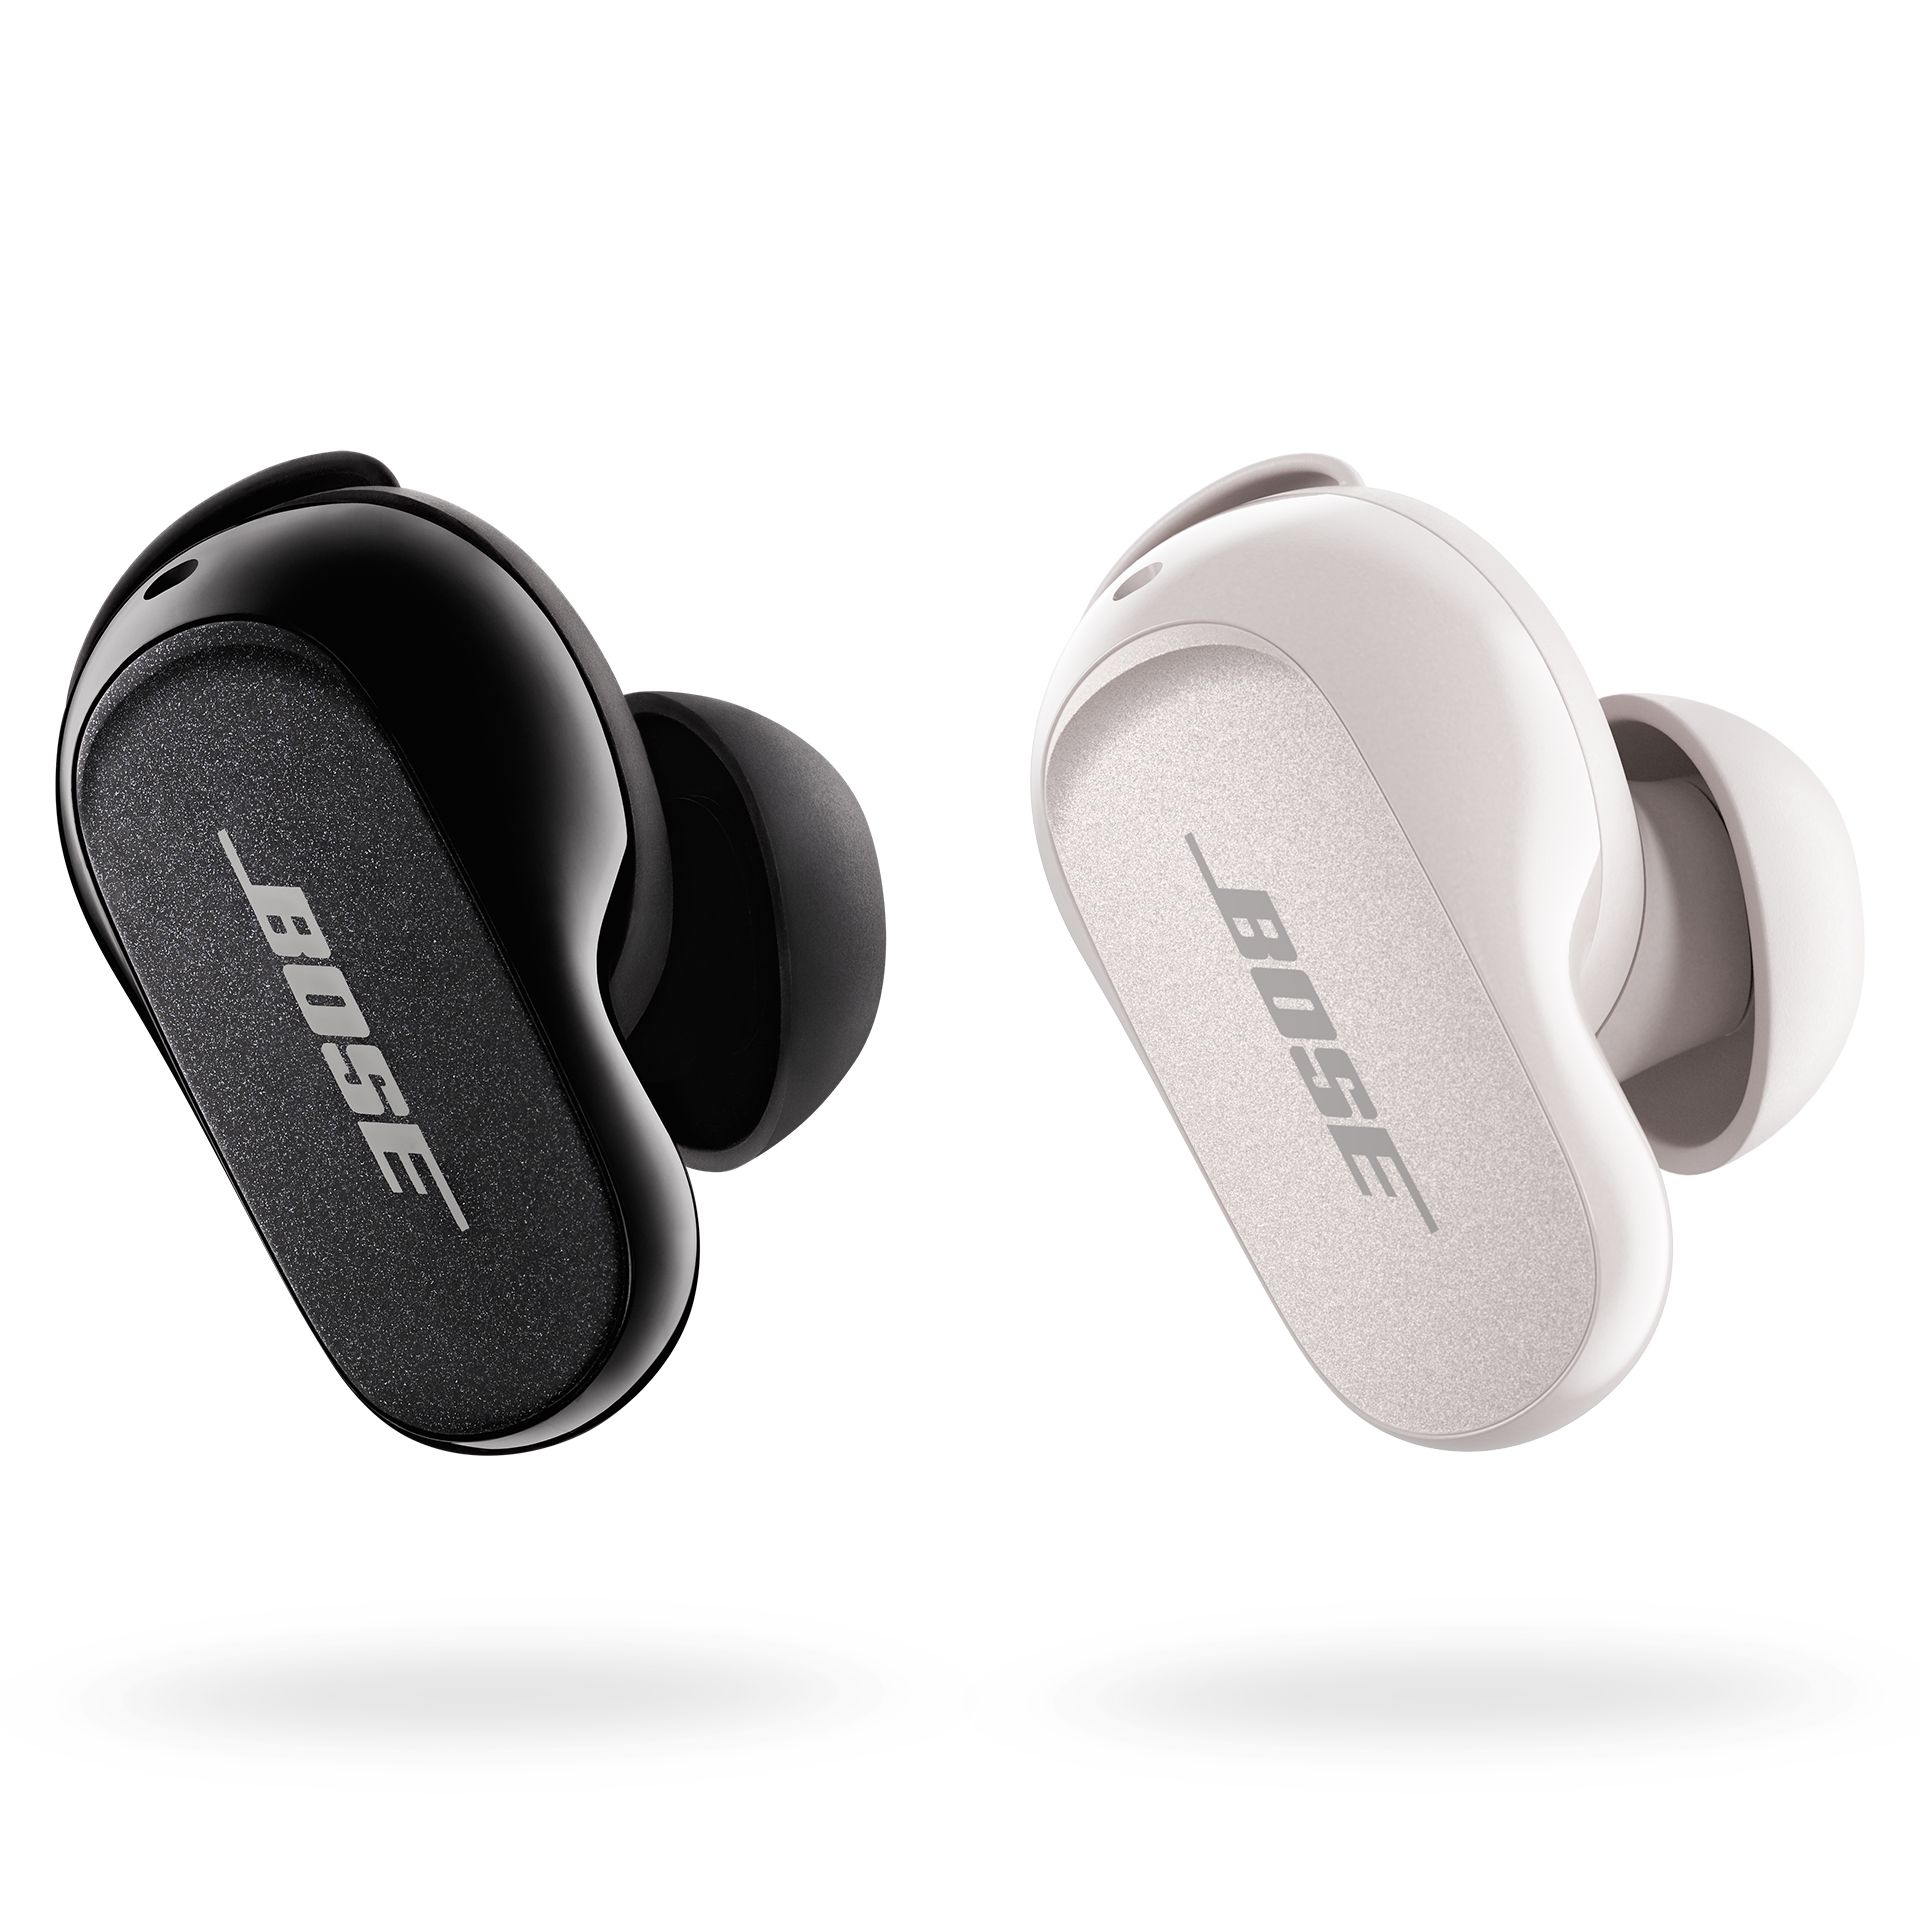 New Bose QuietComfort Earbuds II claim even better noise reduction 